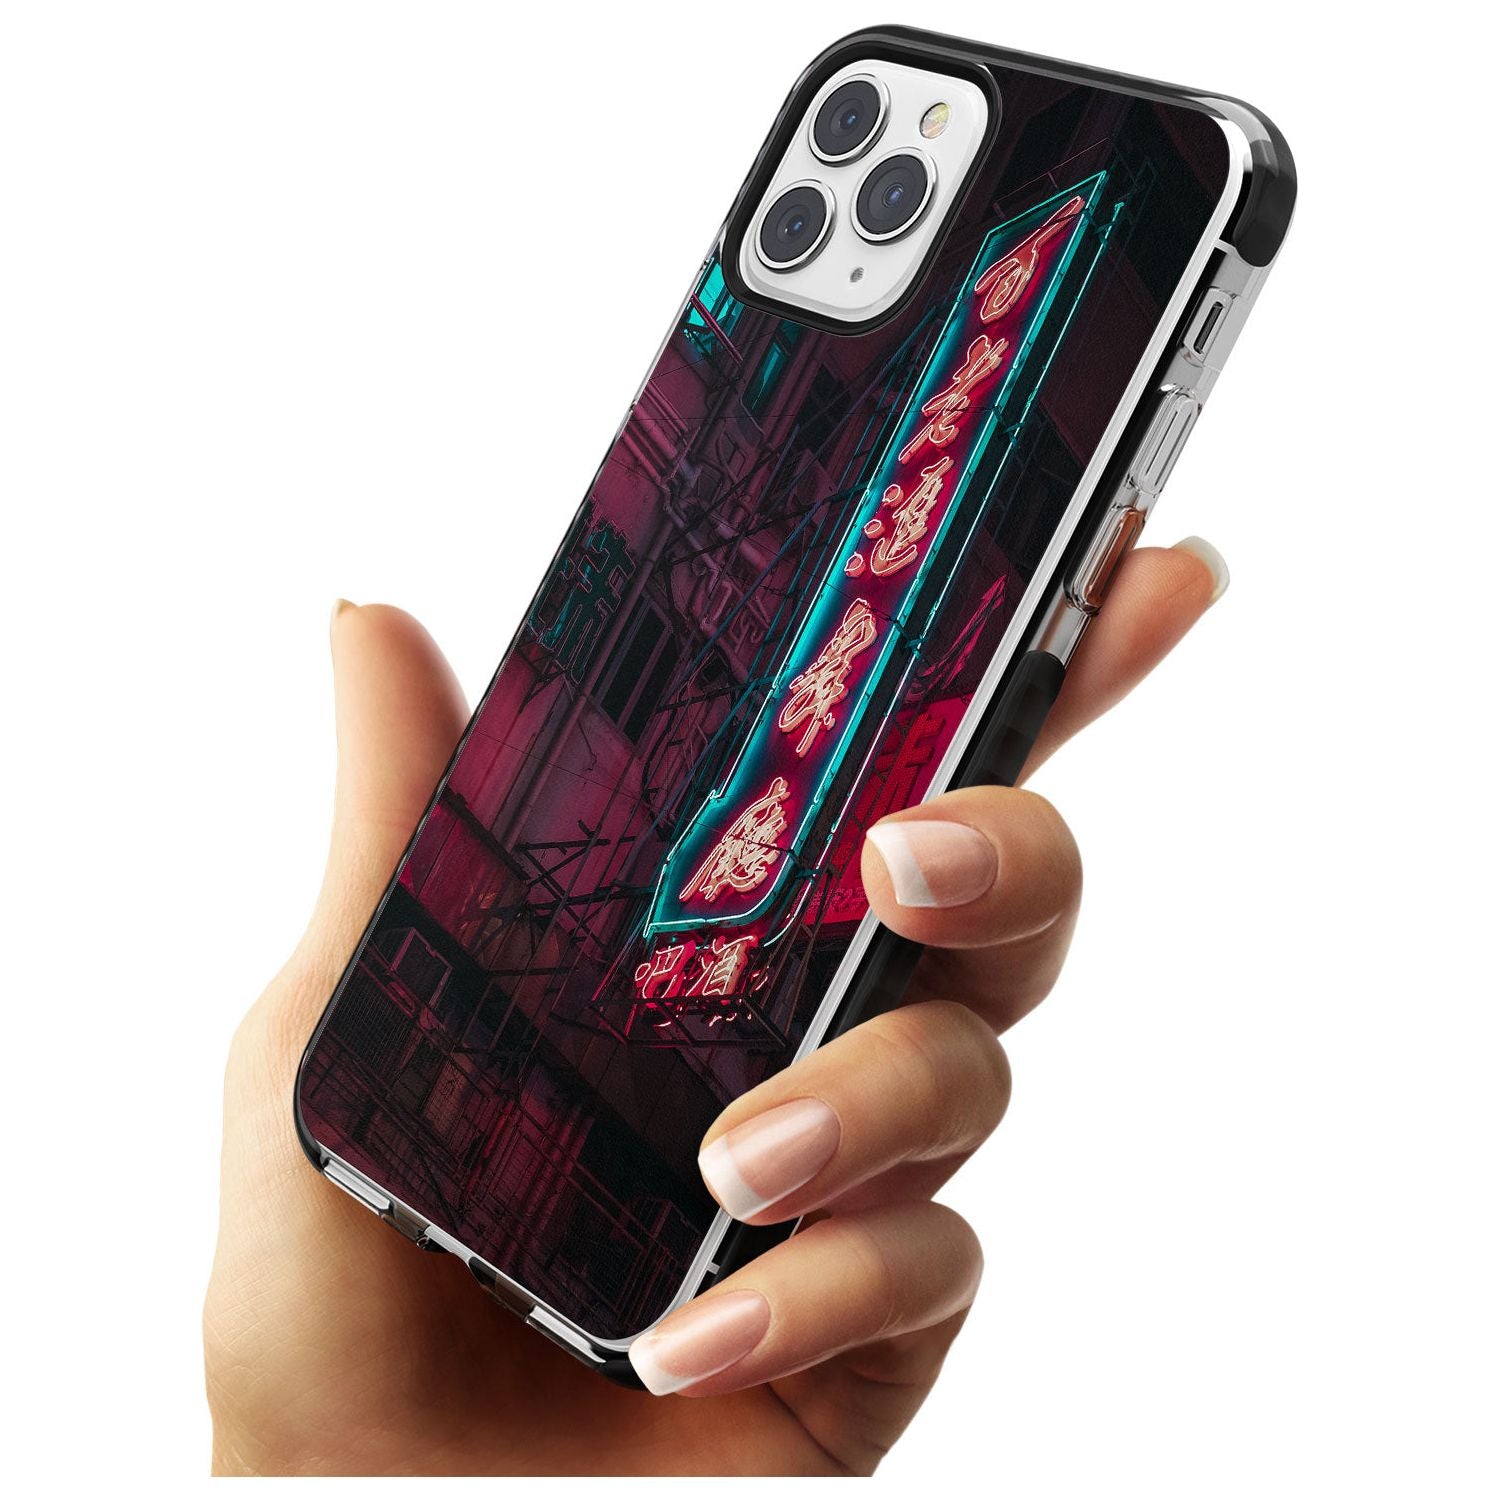 Large Kanji Sign - Neon Cities Photographs Black Impact Phone Case for iPhone 11 Pro Max